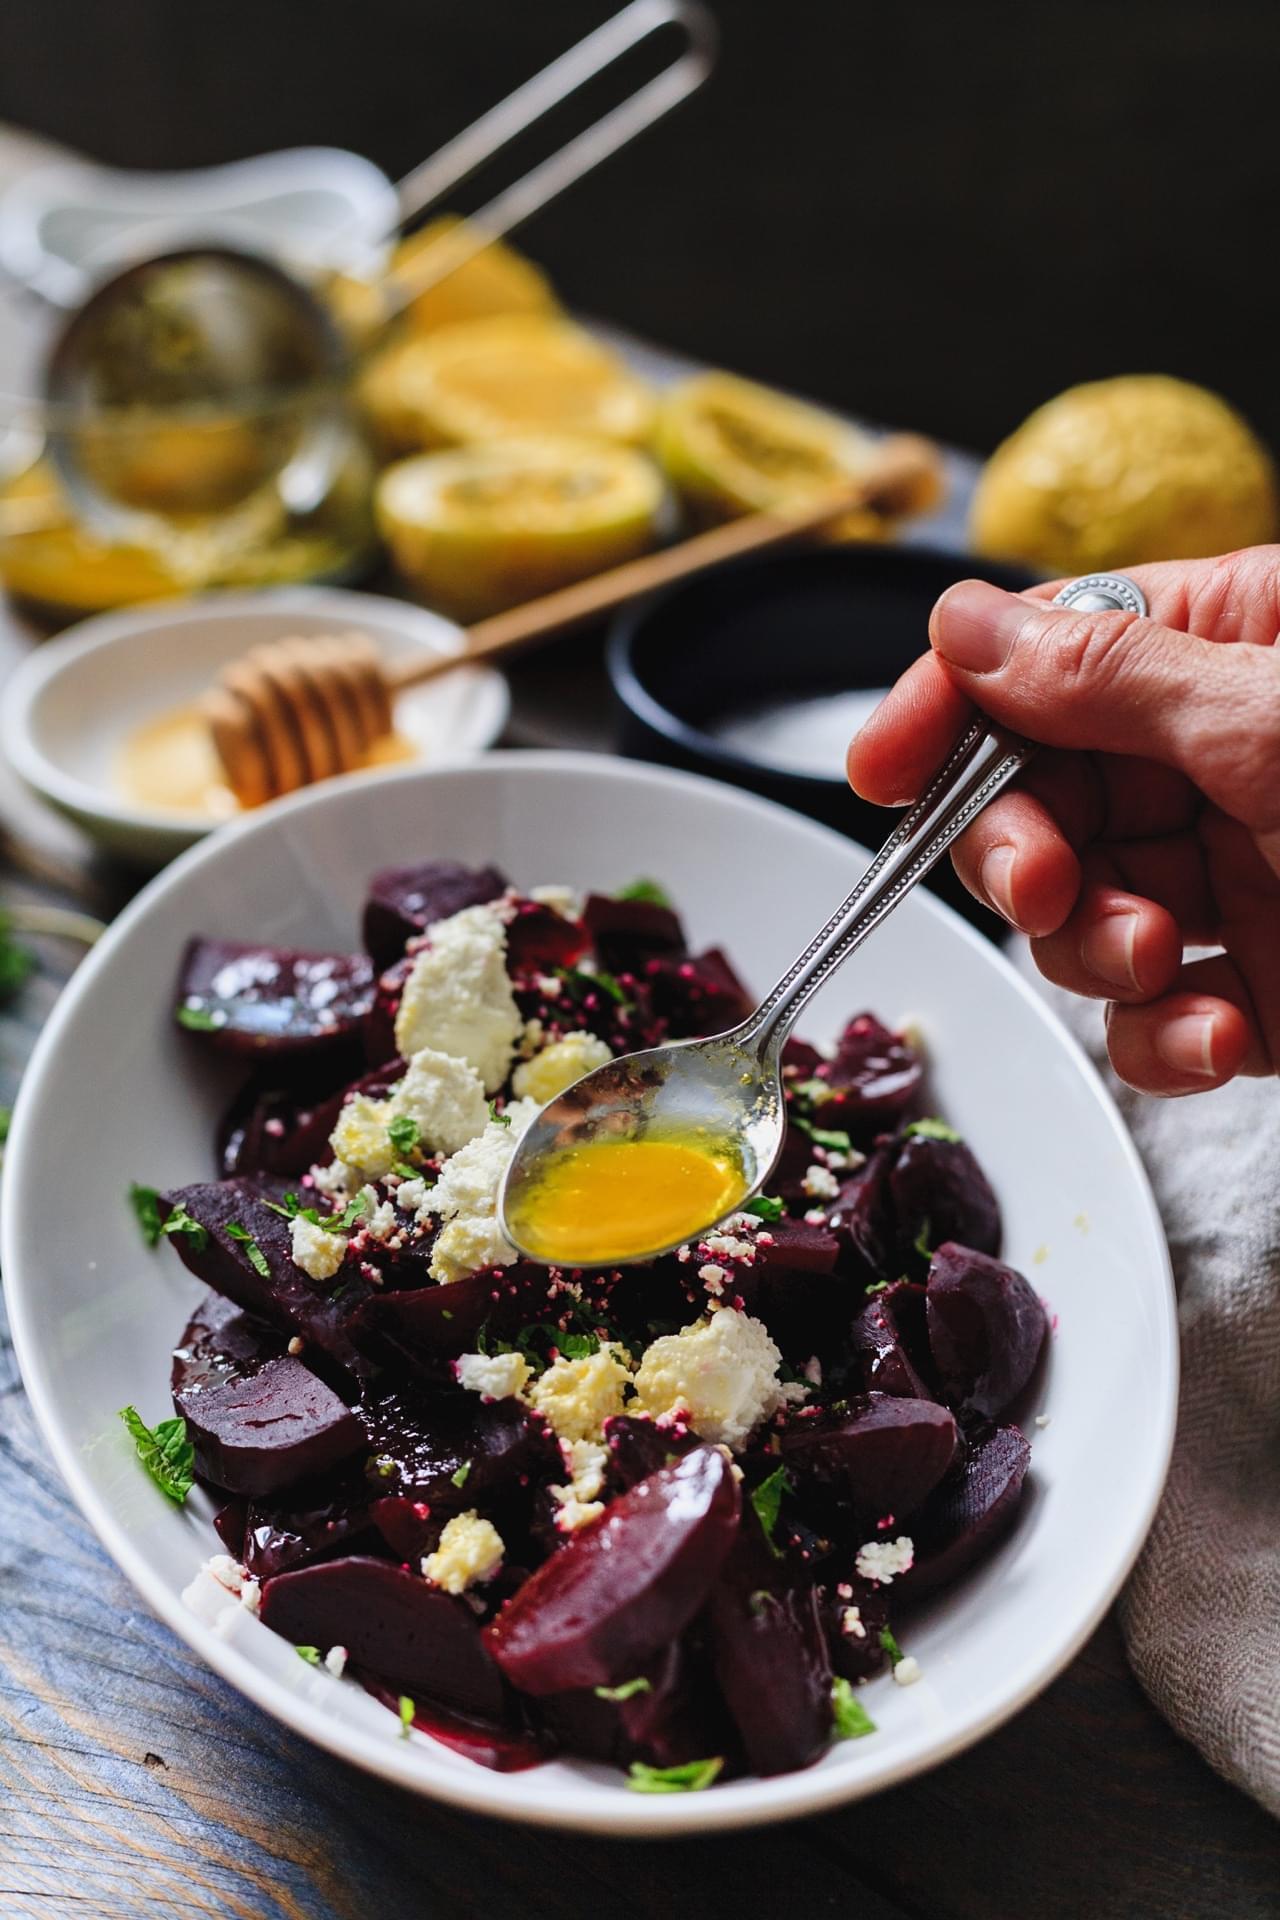 Beet salad with passionfruit dressing